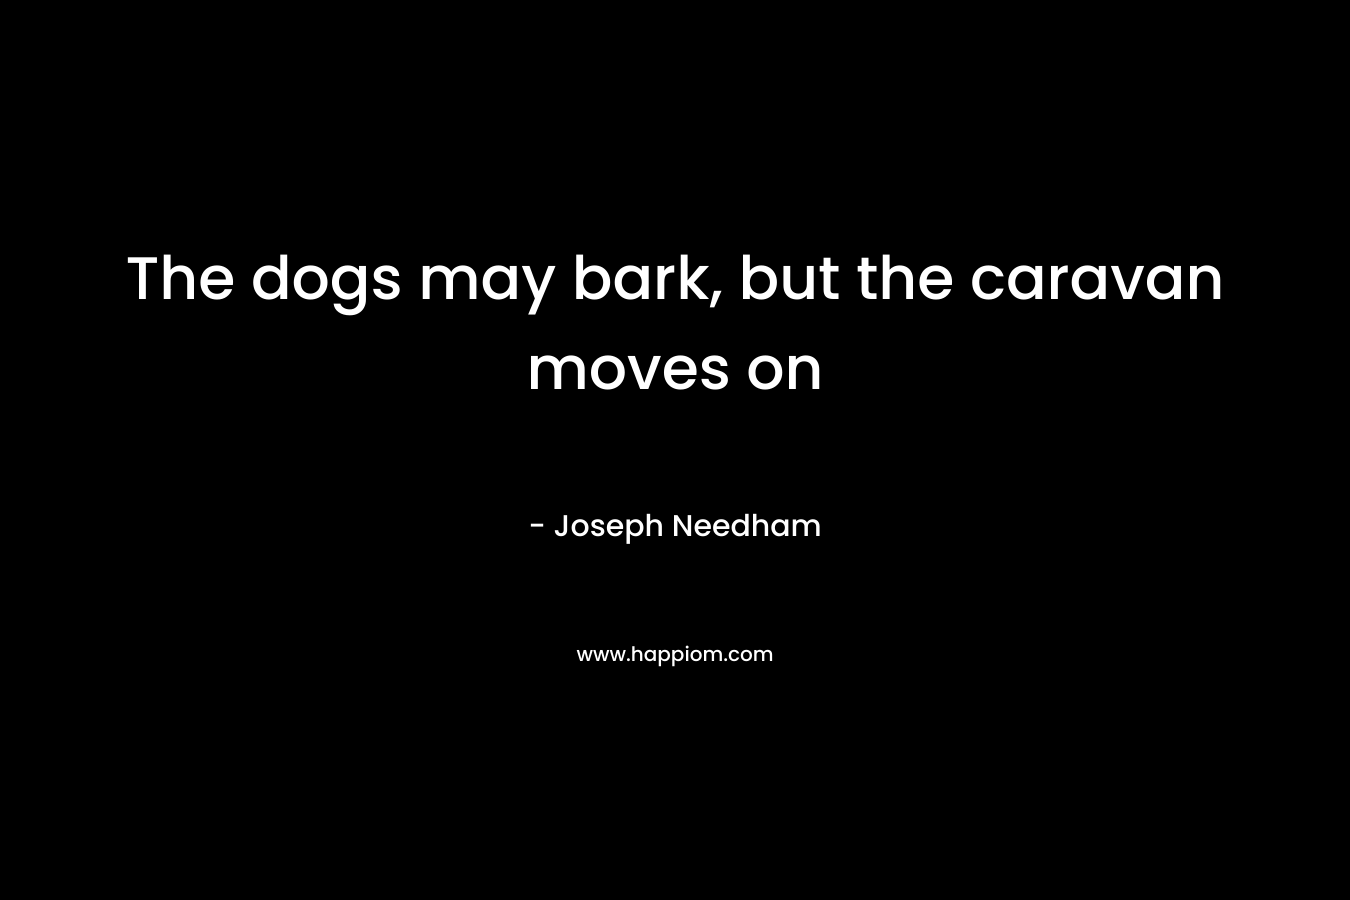 The dogs may bark, but the caravan moves on